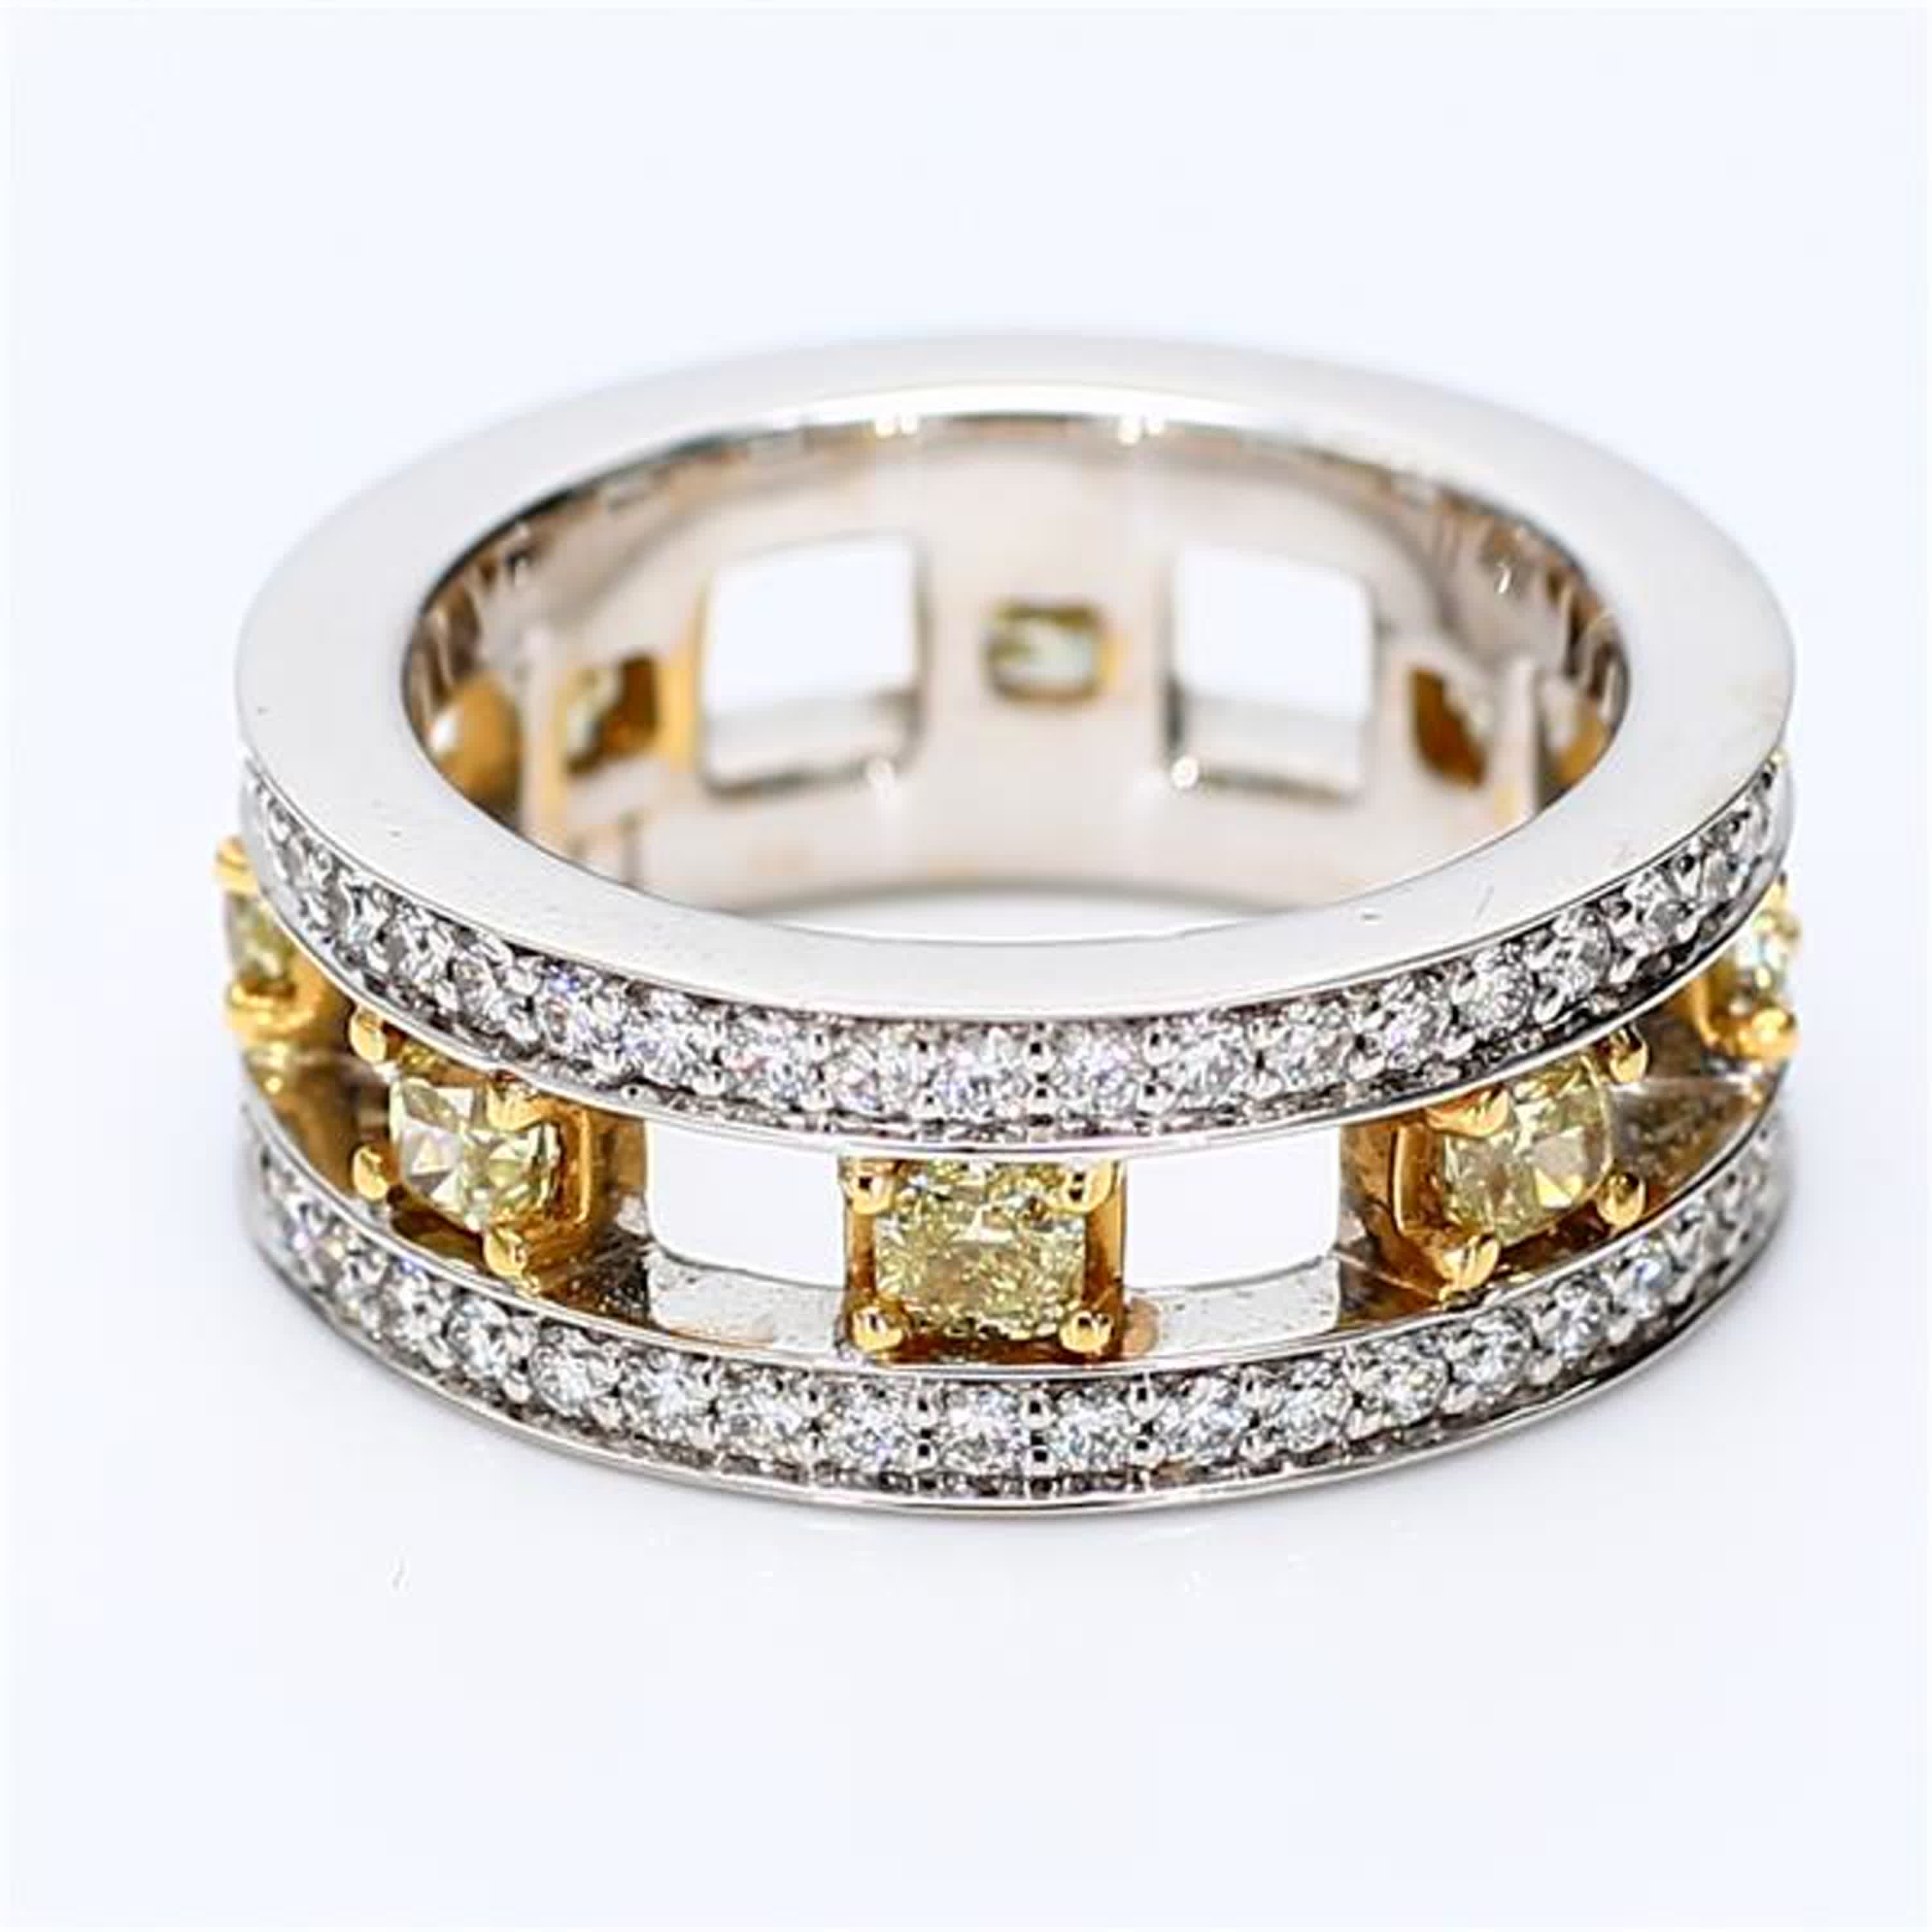 Natural Yellow Radiant and White Diamond 2.01 Carat TW Gold Eternity Band